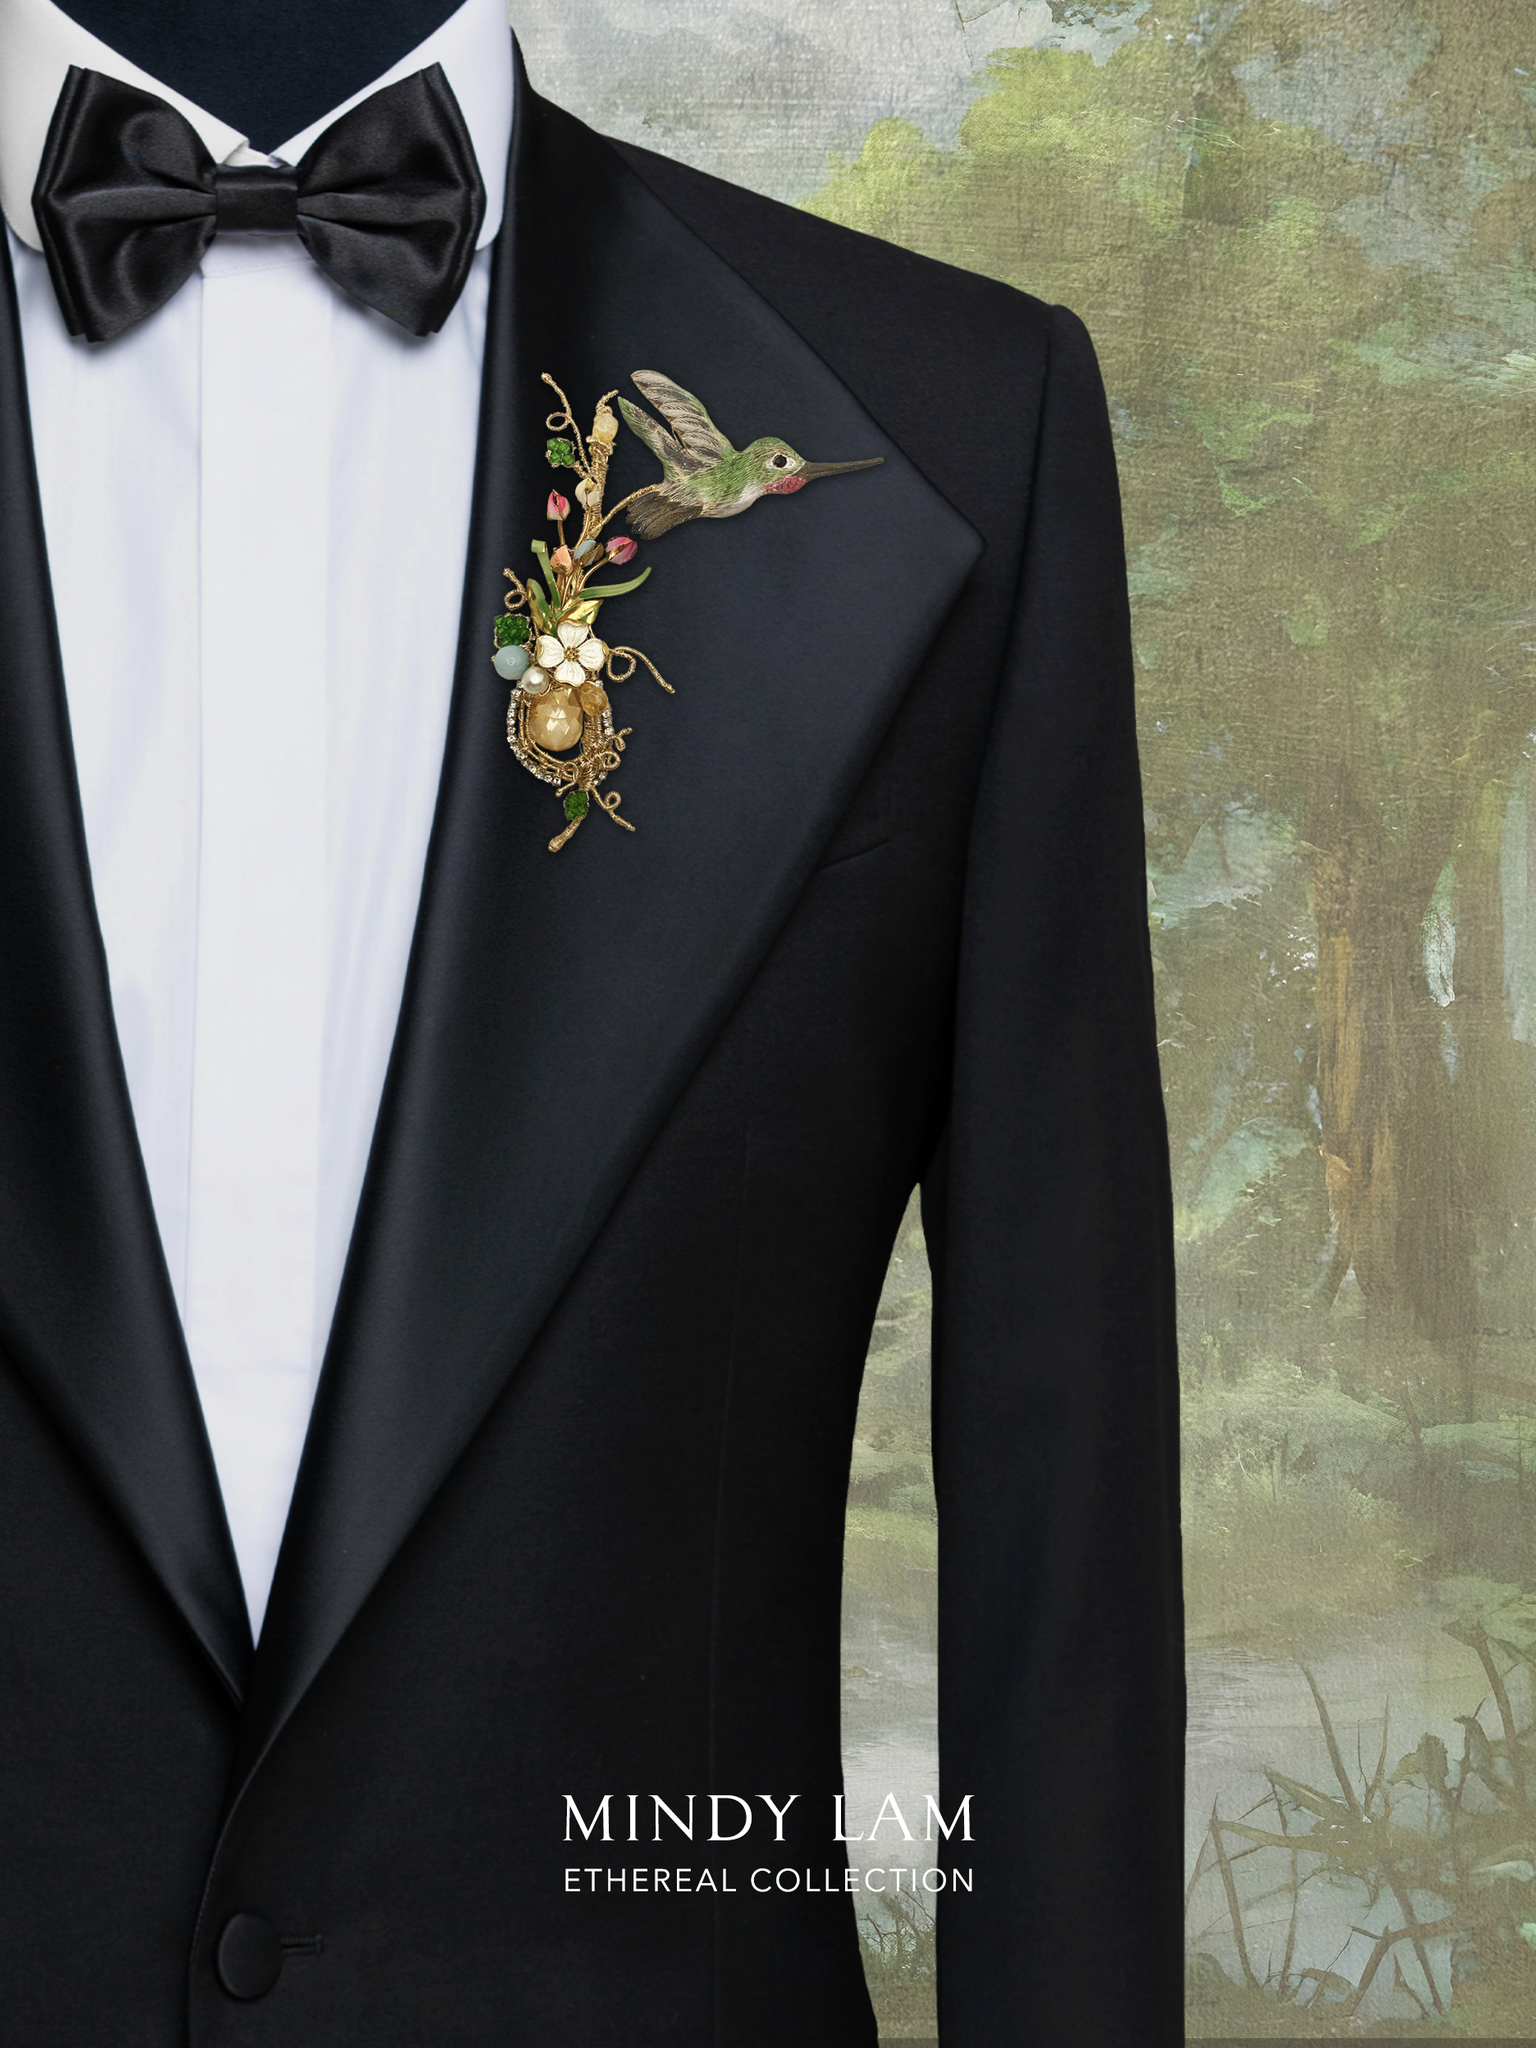 Ethereal Collection Lapel Pin - Humming in the Garden